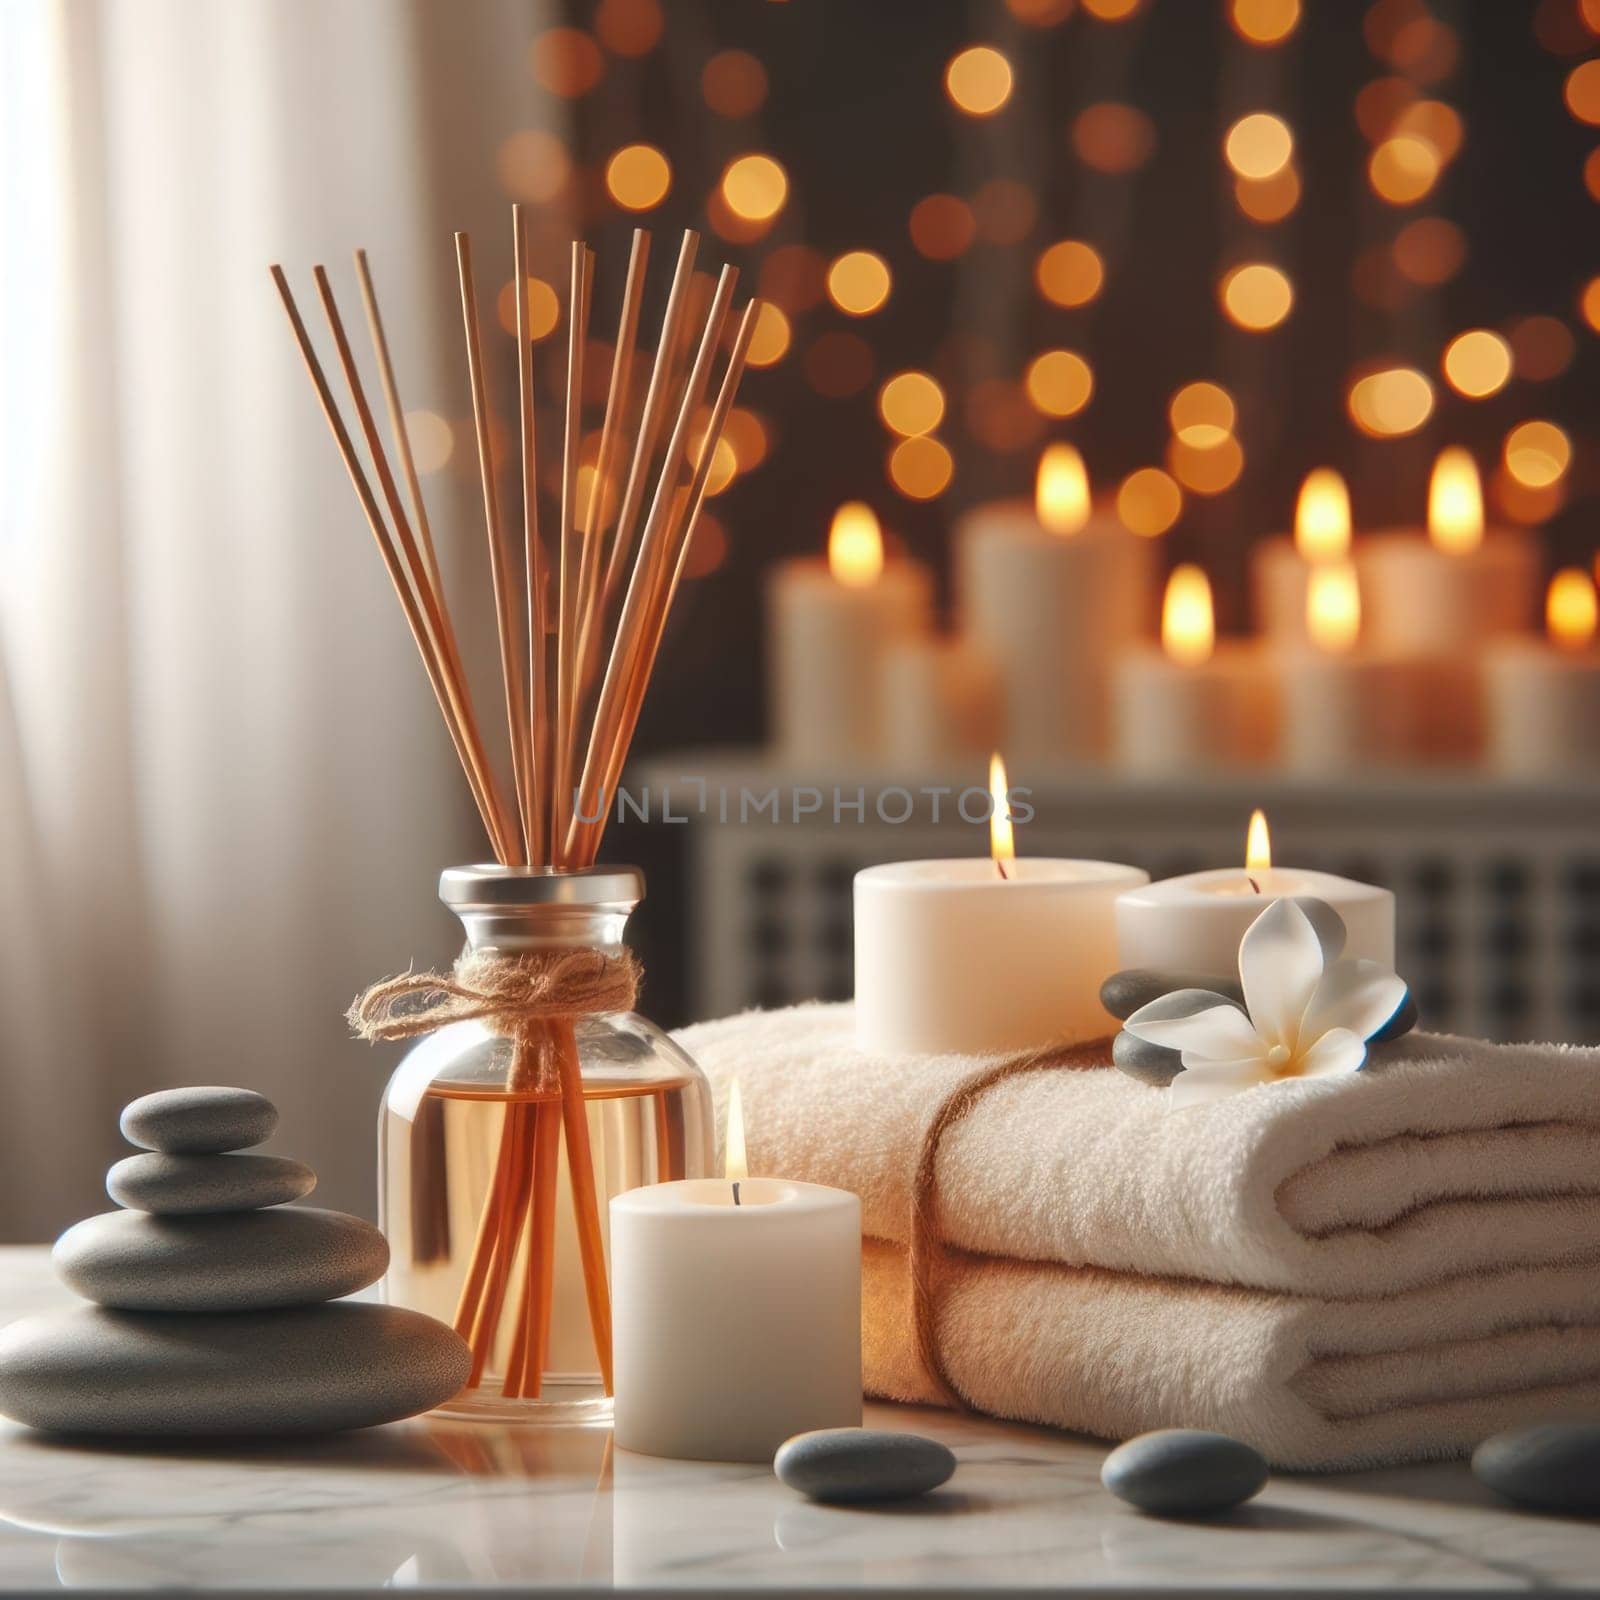 Spa Composition with Burning Candles 04 by Ruckzack